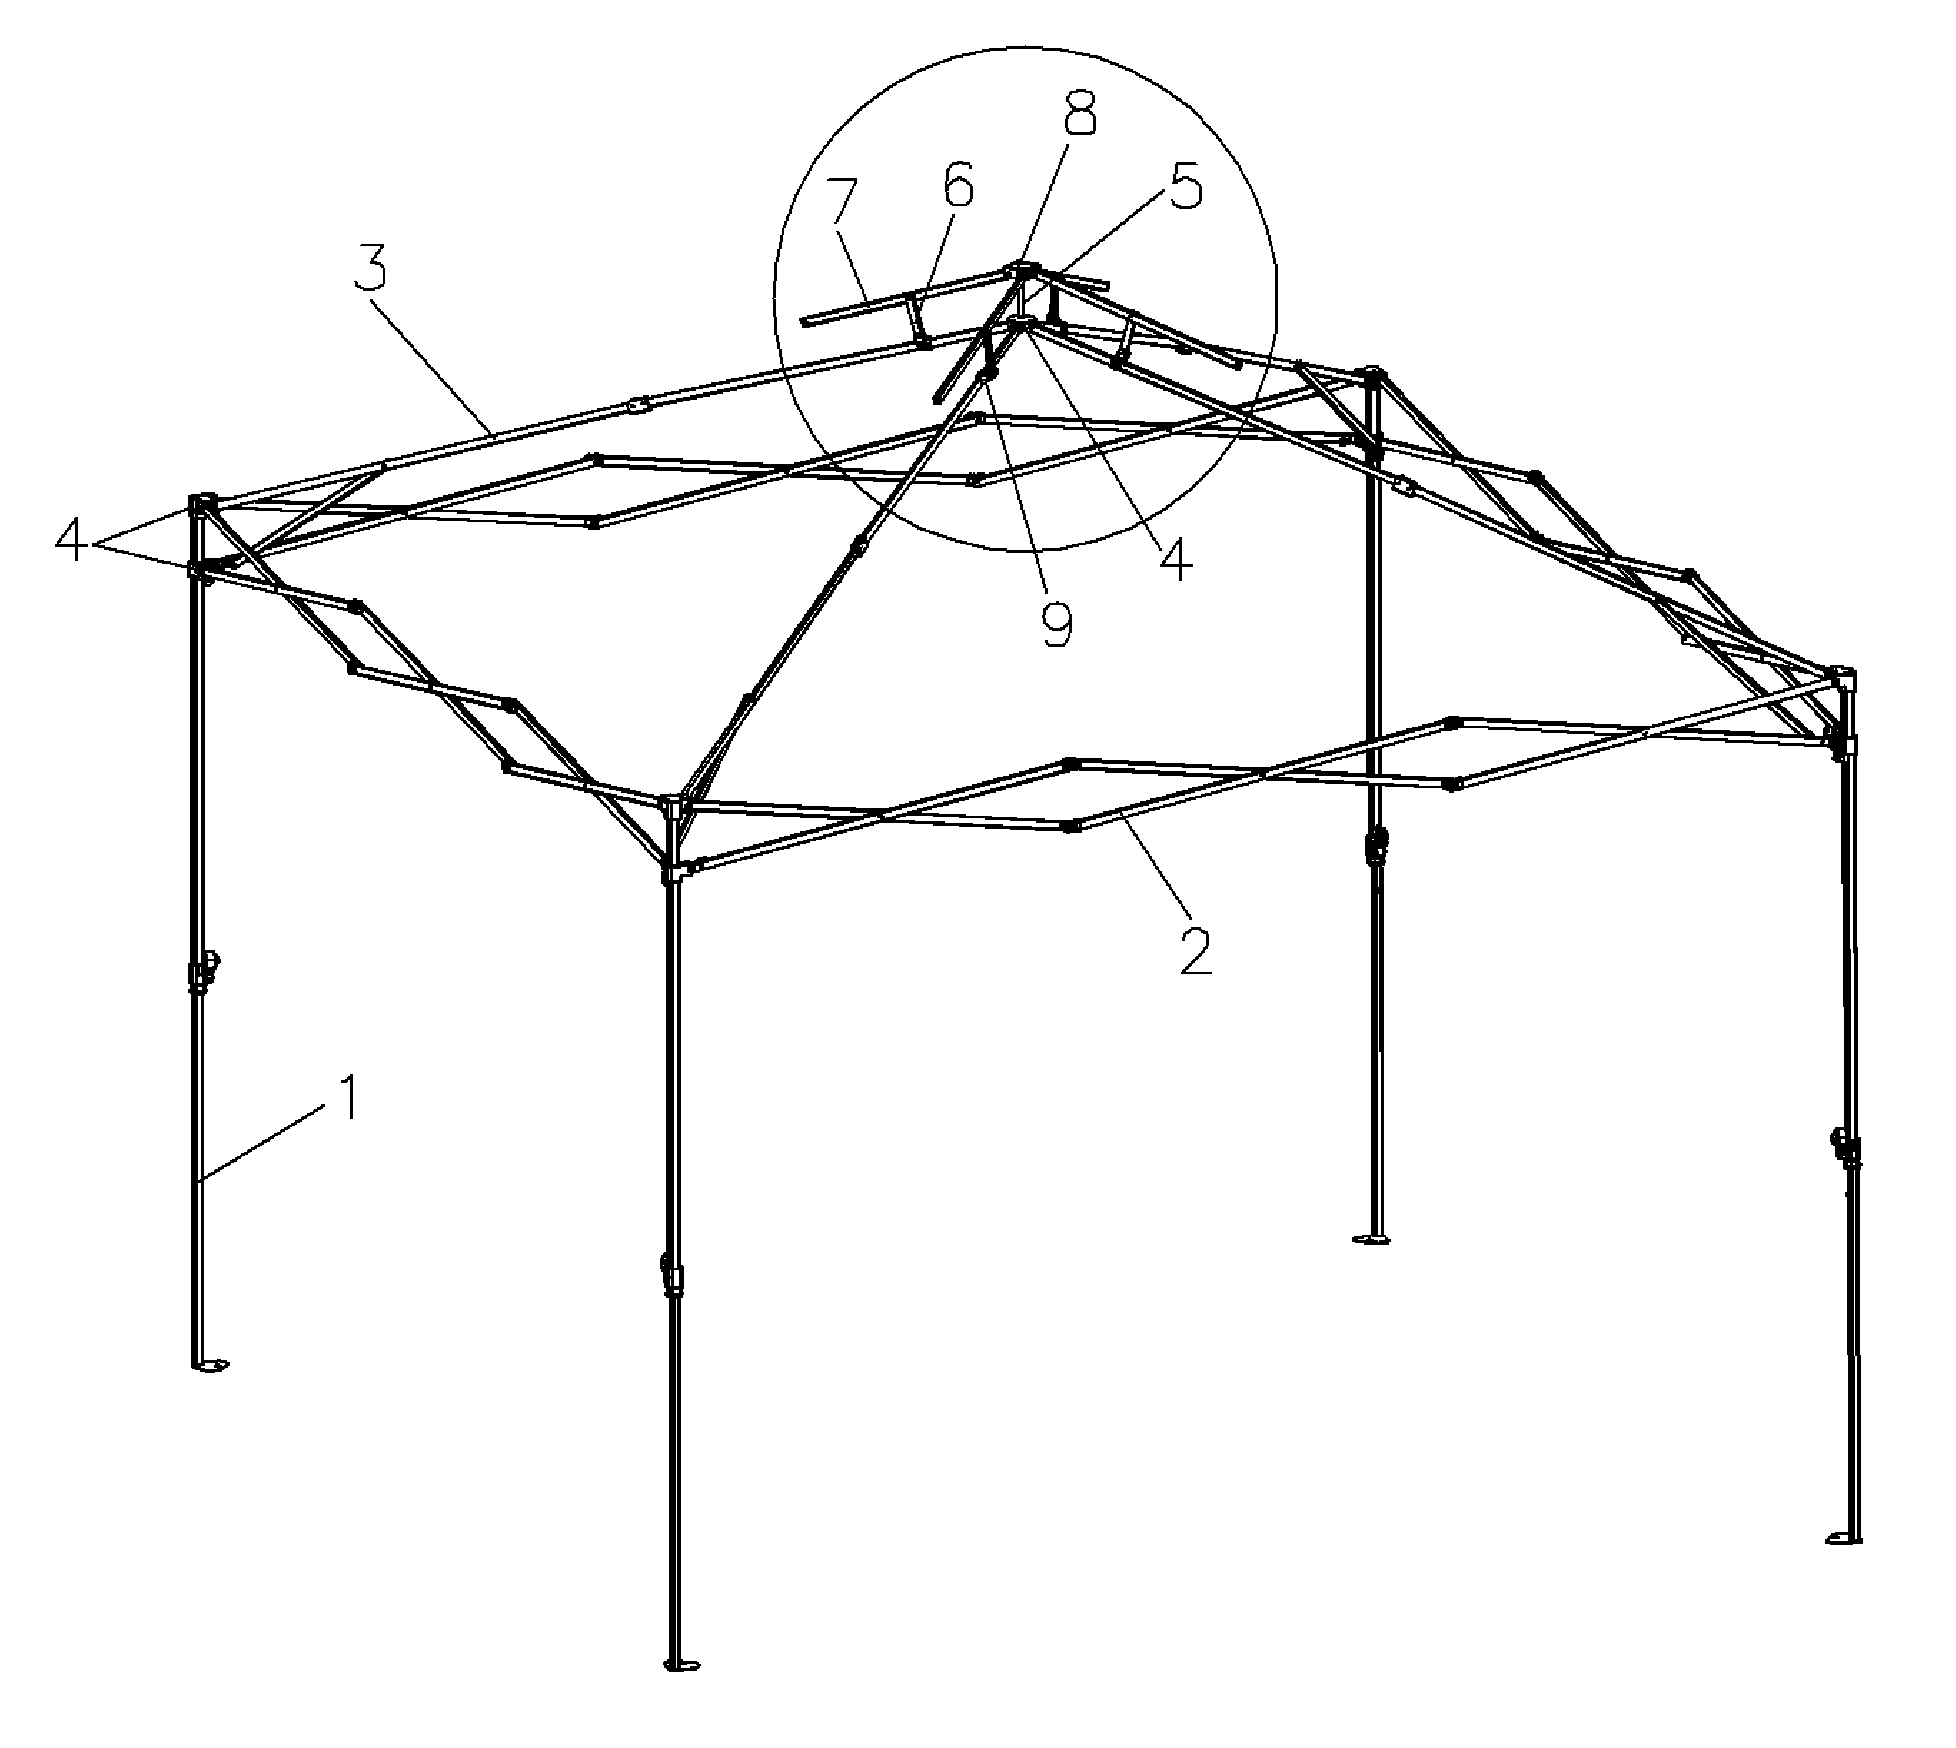 A vent of foldable tent frame